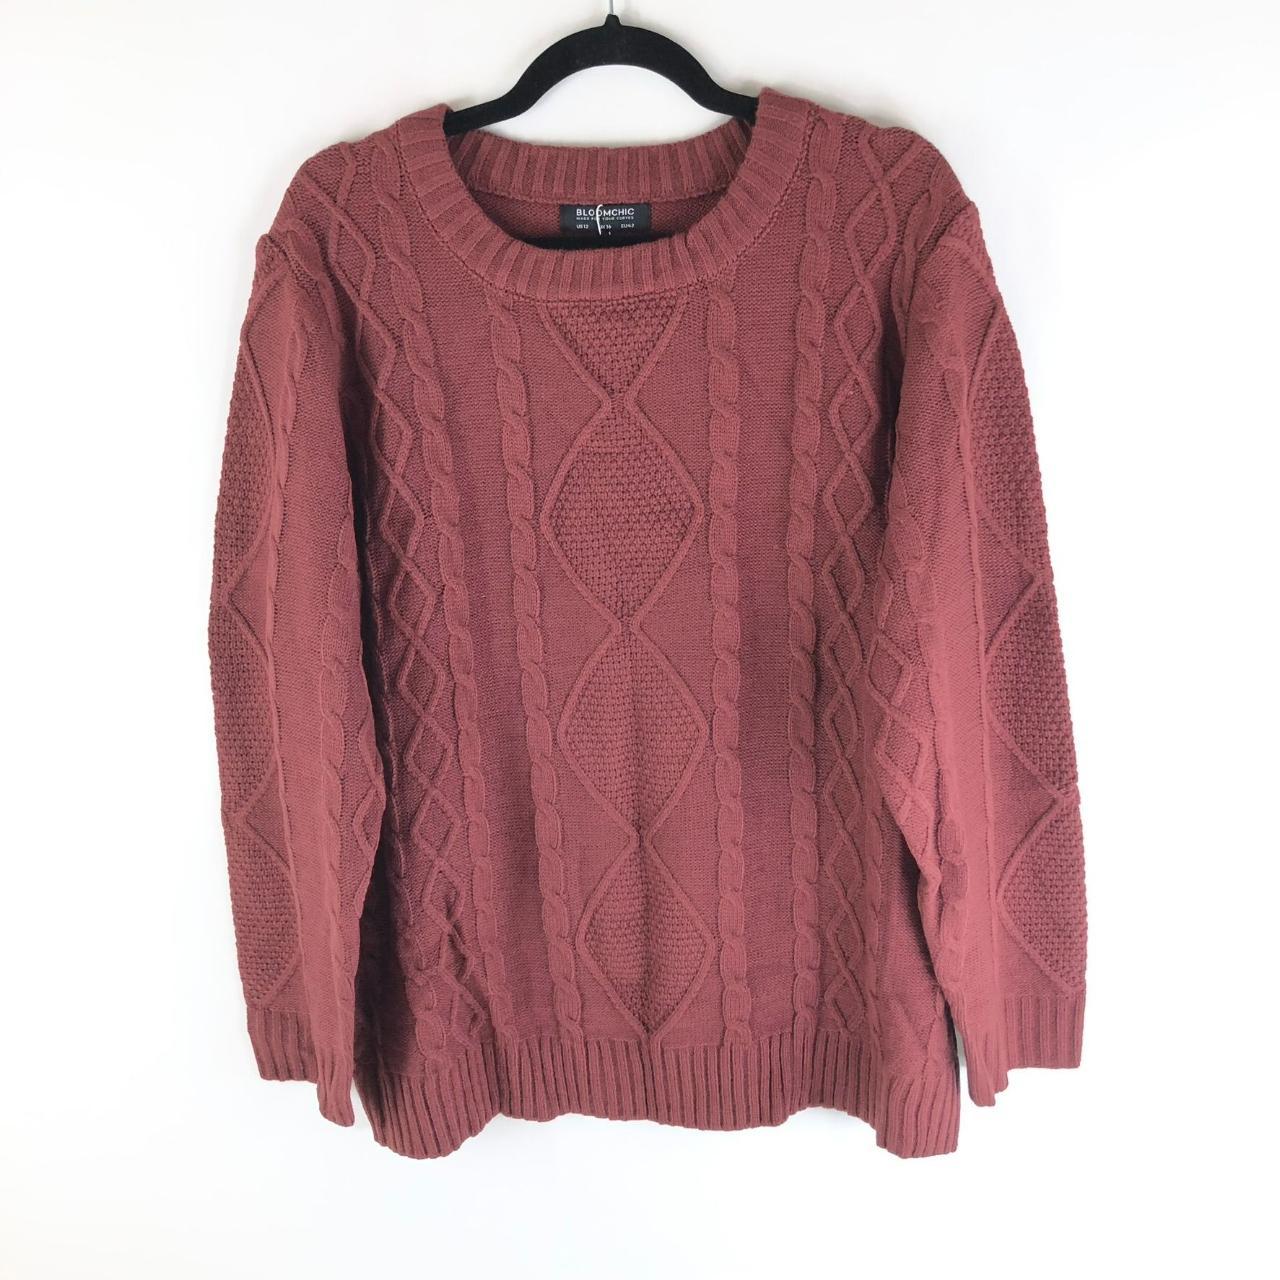 Bloomchic Pointelle Knit Round Neck Geometric Cable - Depop